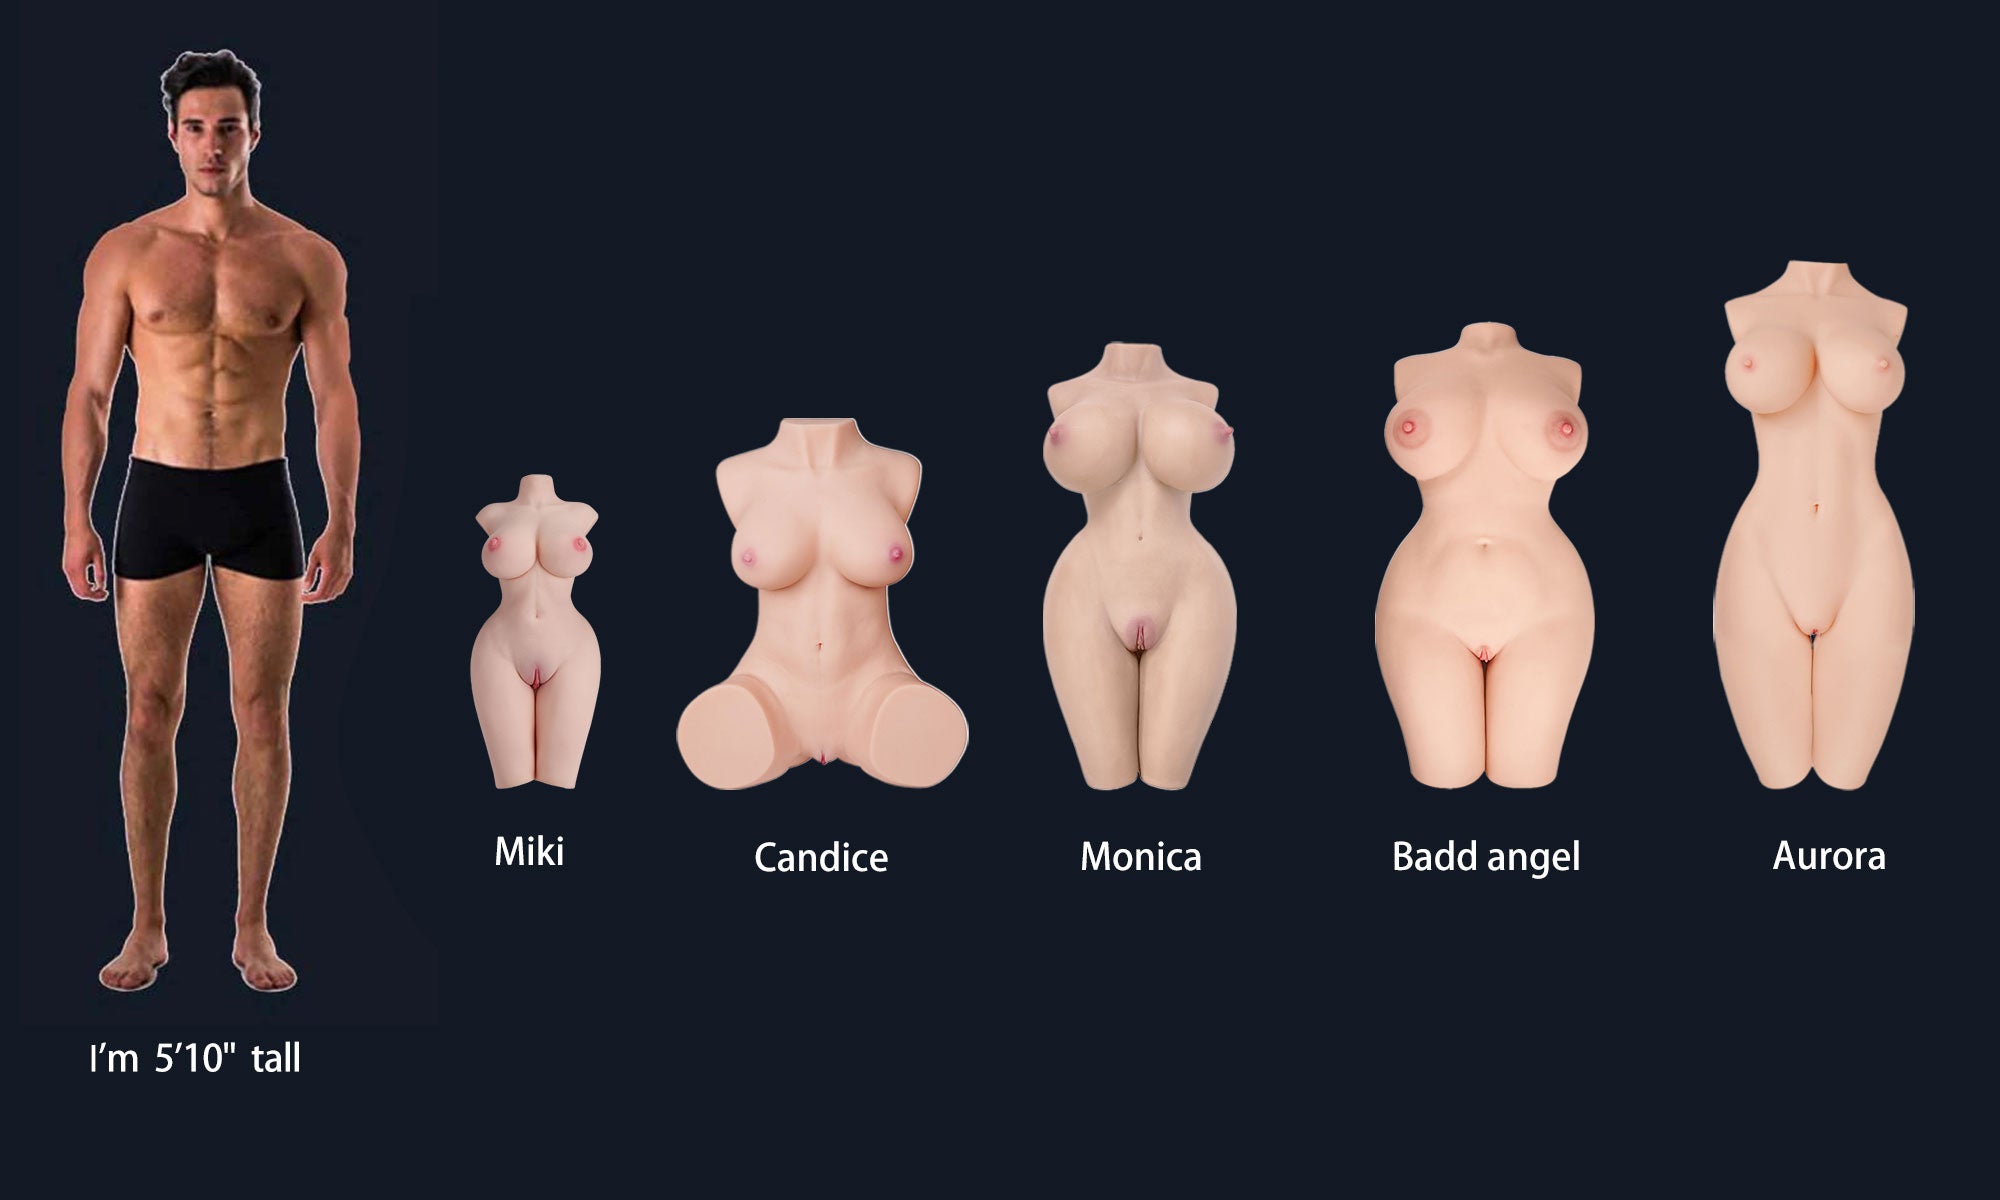 aurora doll comparison with other hot dolls.jpg__PID:bcd1d2e8-c4a9-4851-a83e-513c2eb54d10